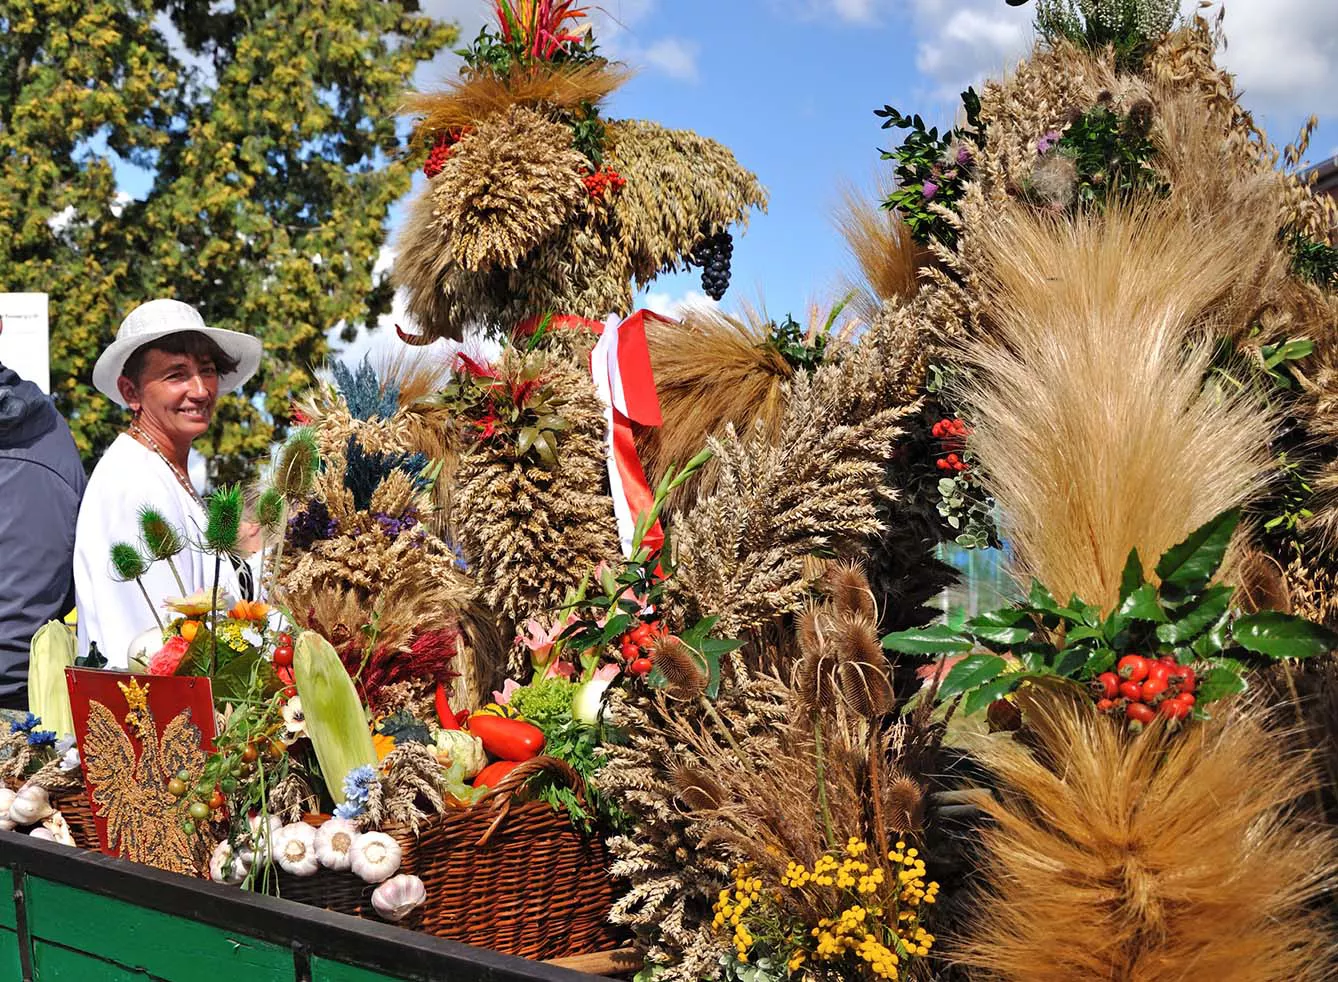 Polish harvest festival - Green cart full of harvest garlands with smiling woman in white dress and white hat